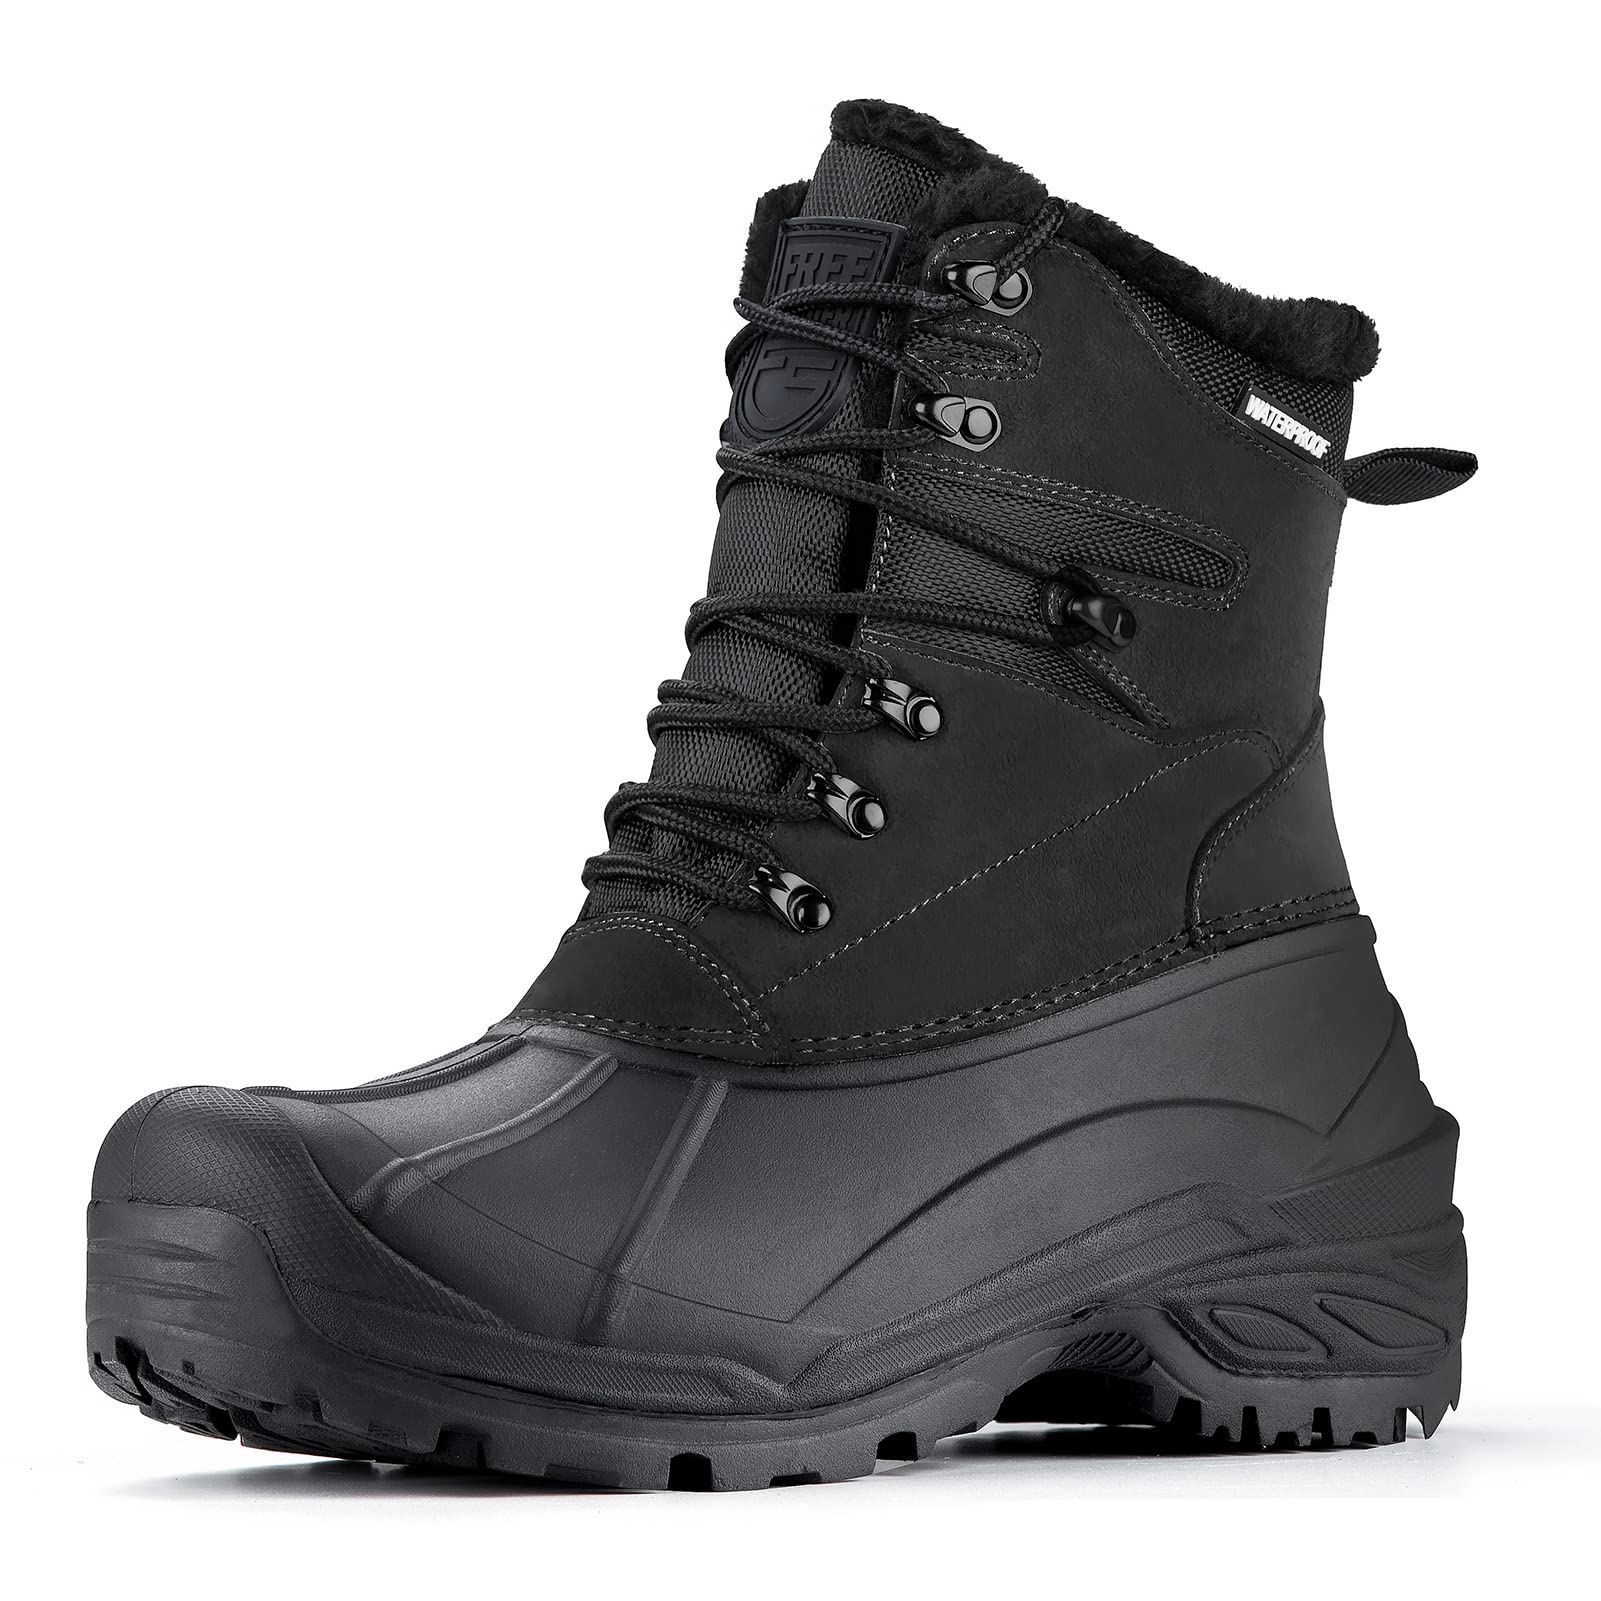 Insulated Waterproof Winter Hunting Boots